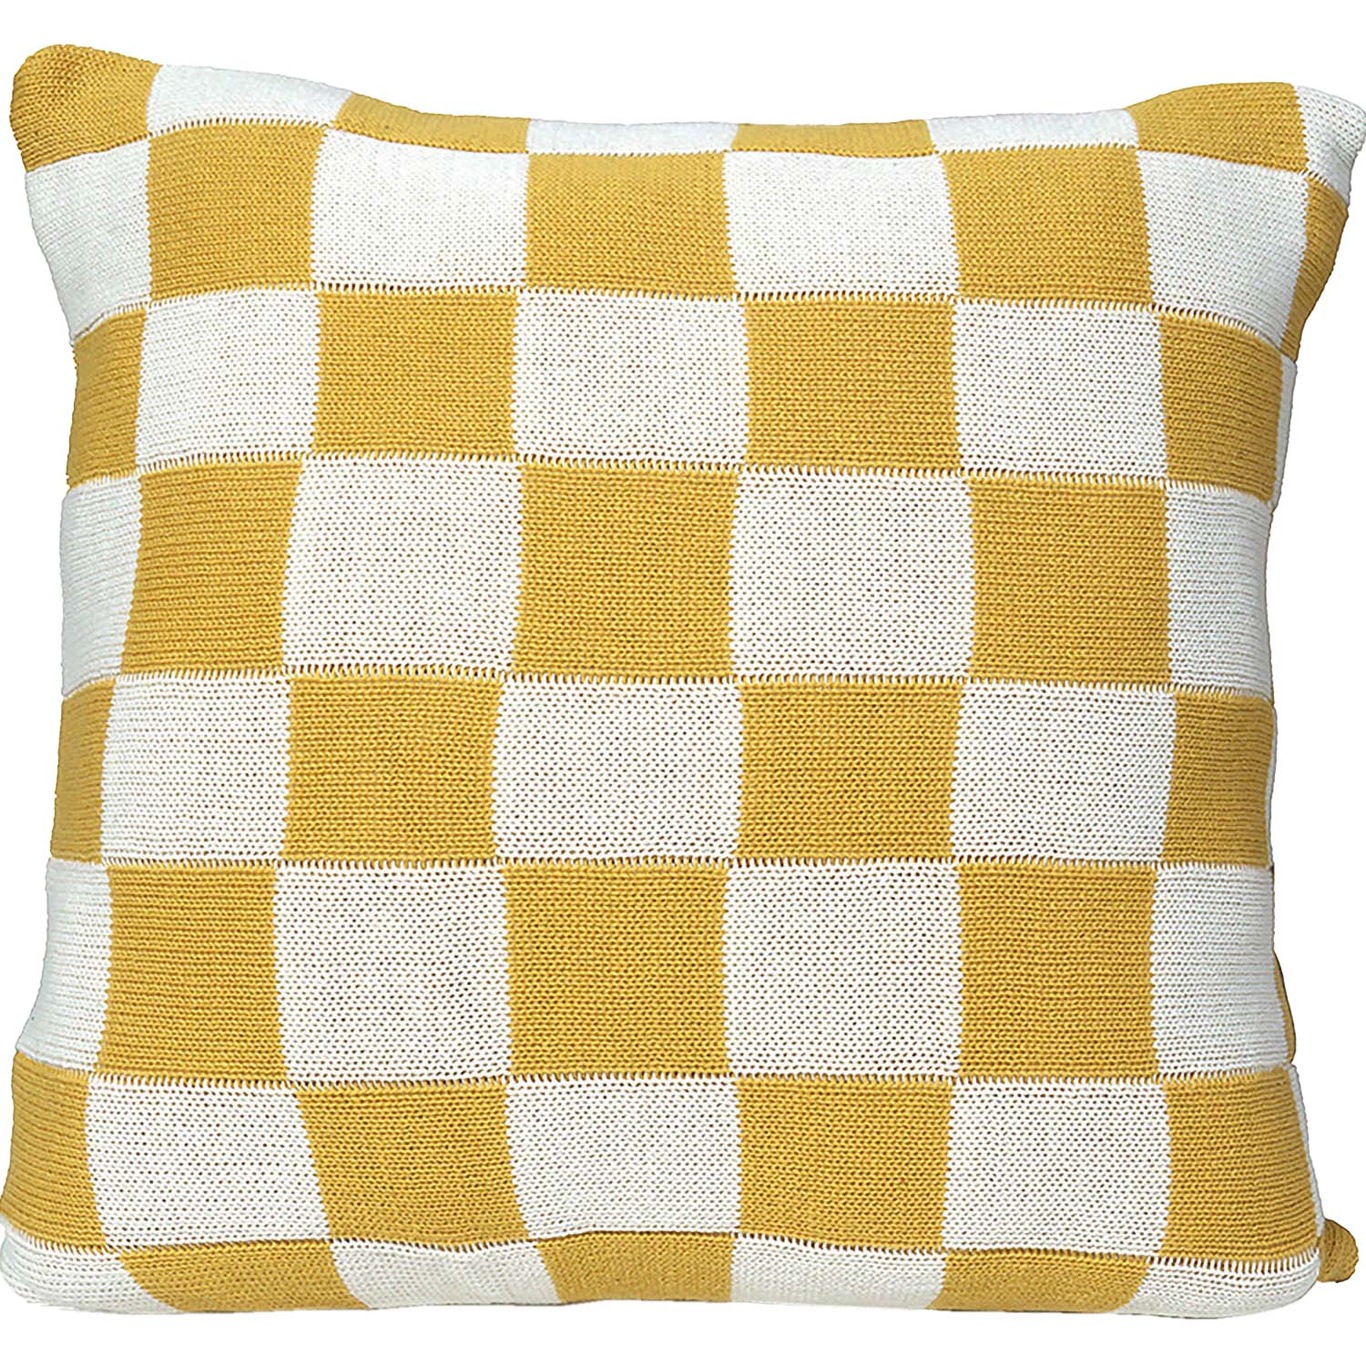 Knitted Check Cushion Cover 50x50 cm, Yellow